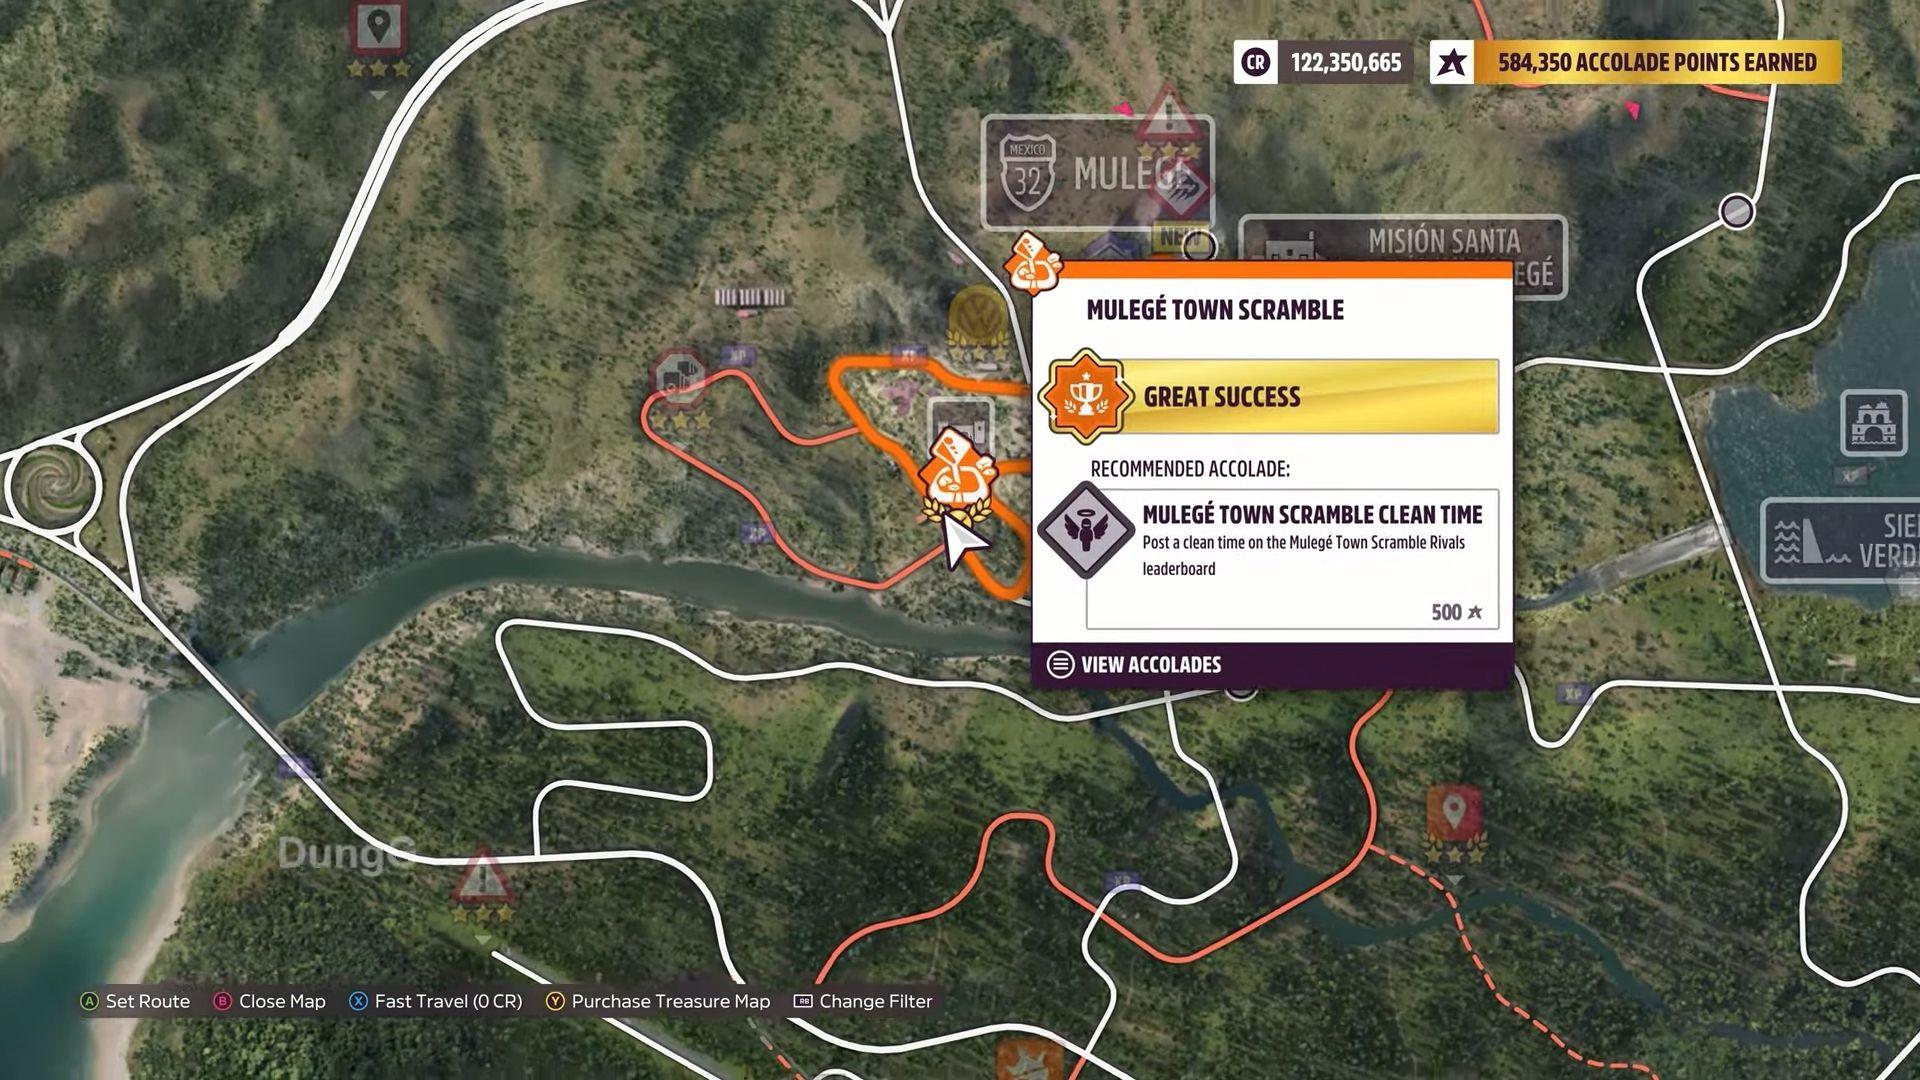 Forza Horizon 5: Potential Expansion Map Locations - KeenGamer